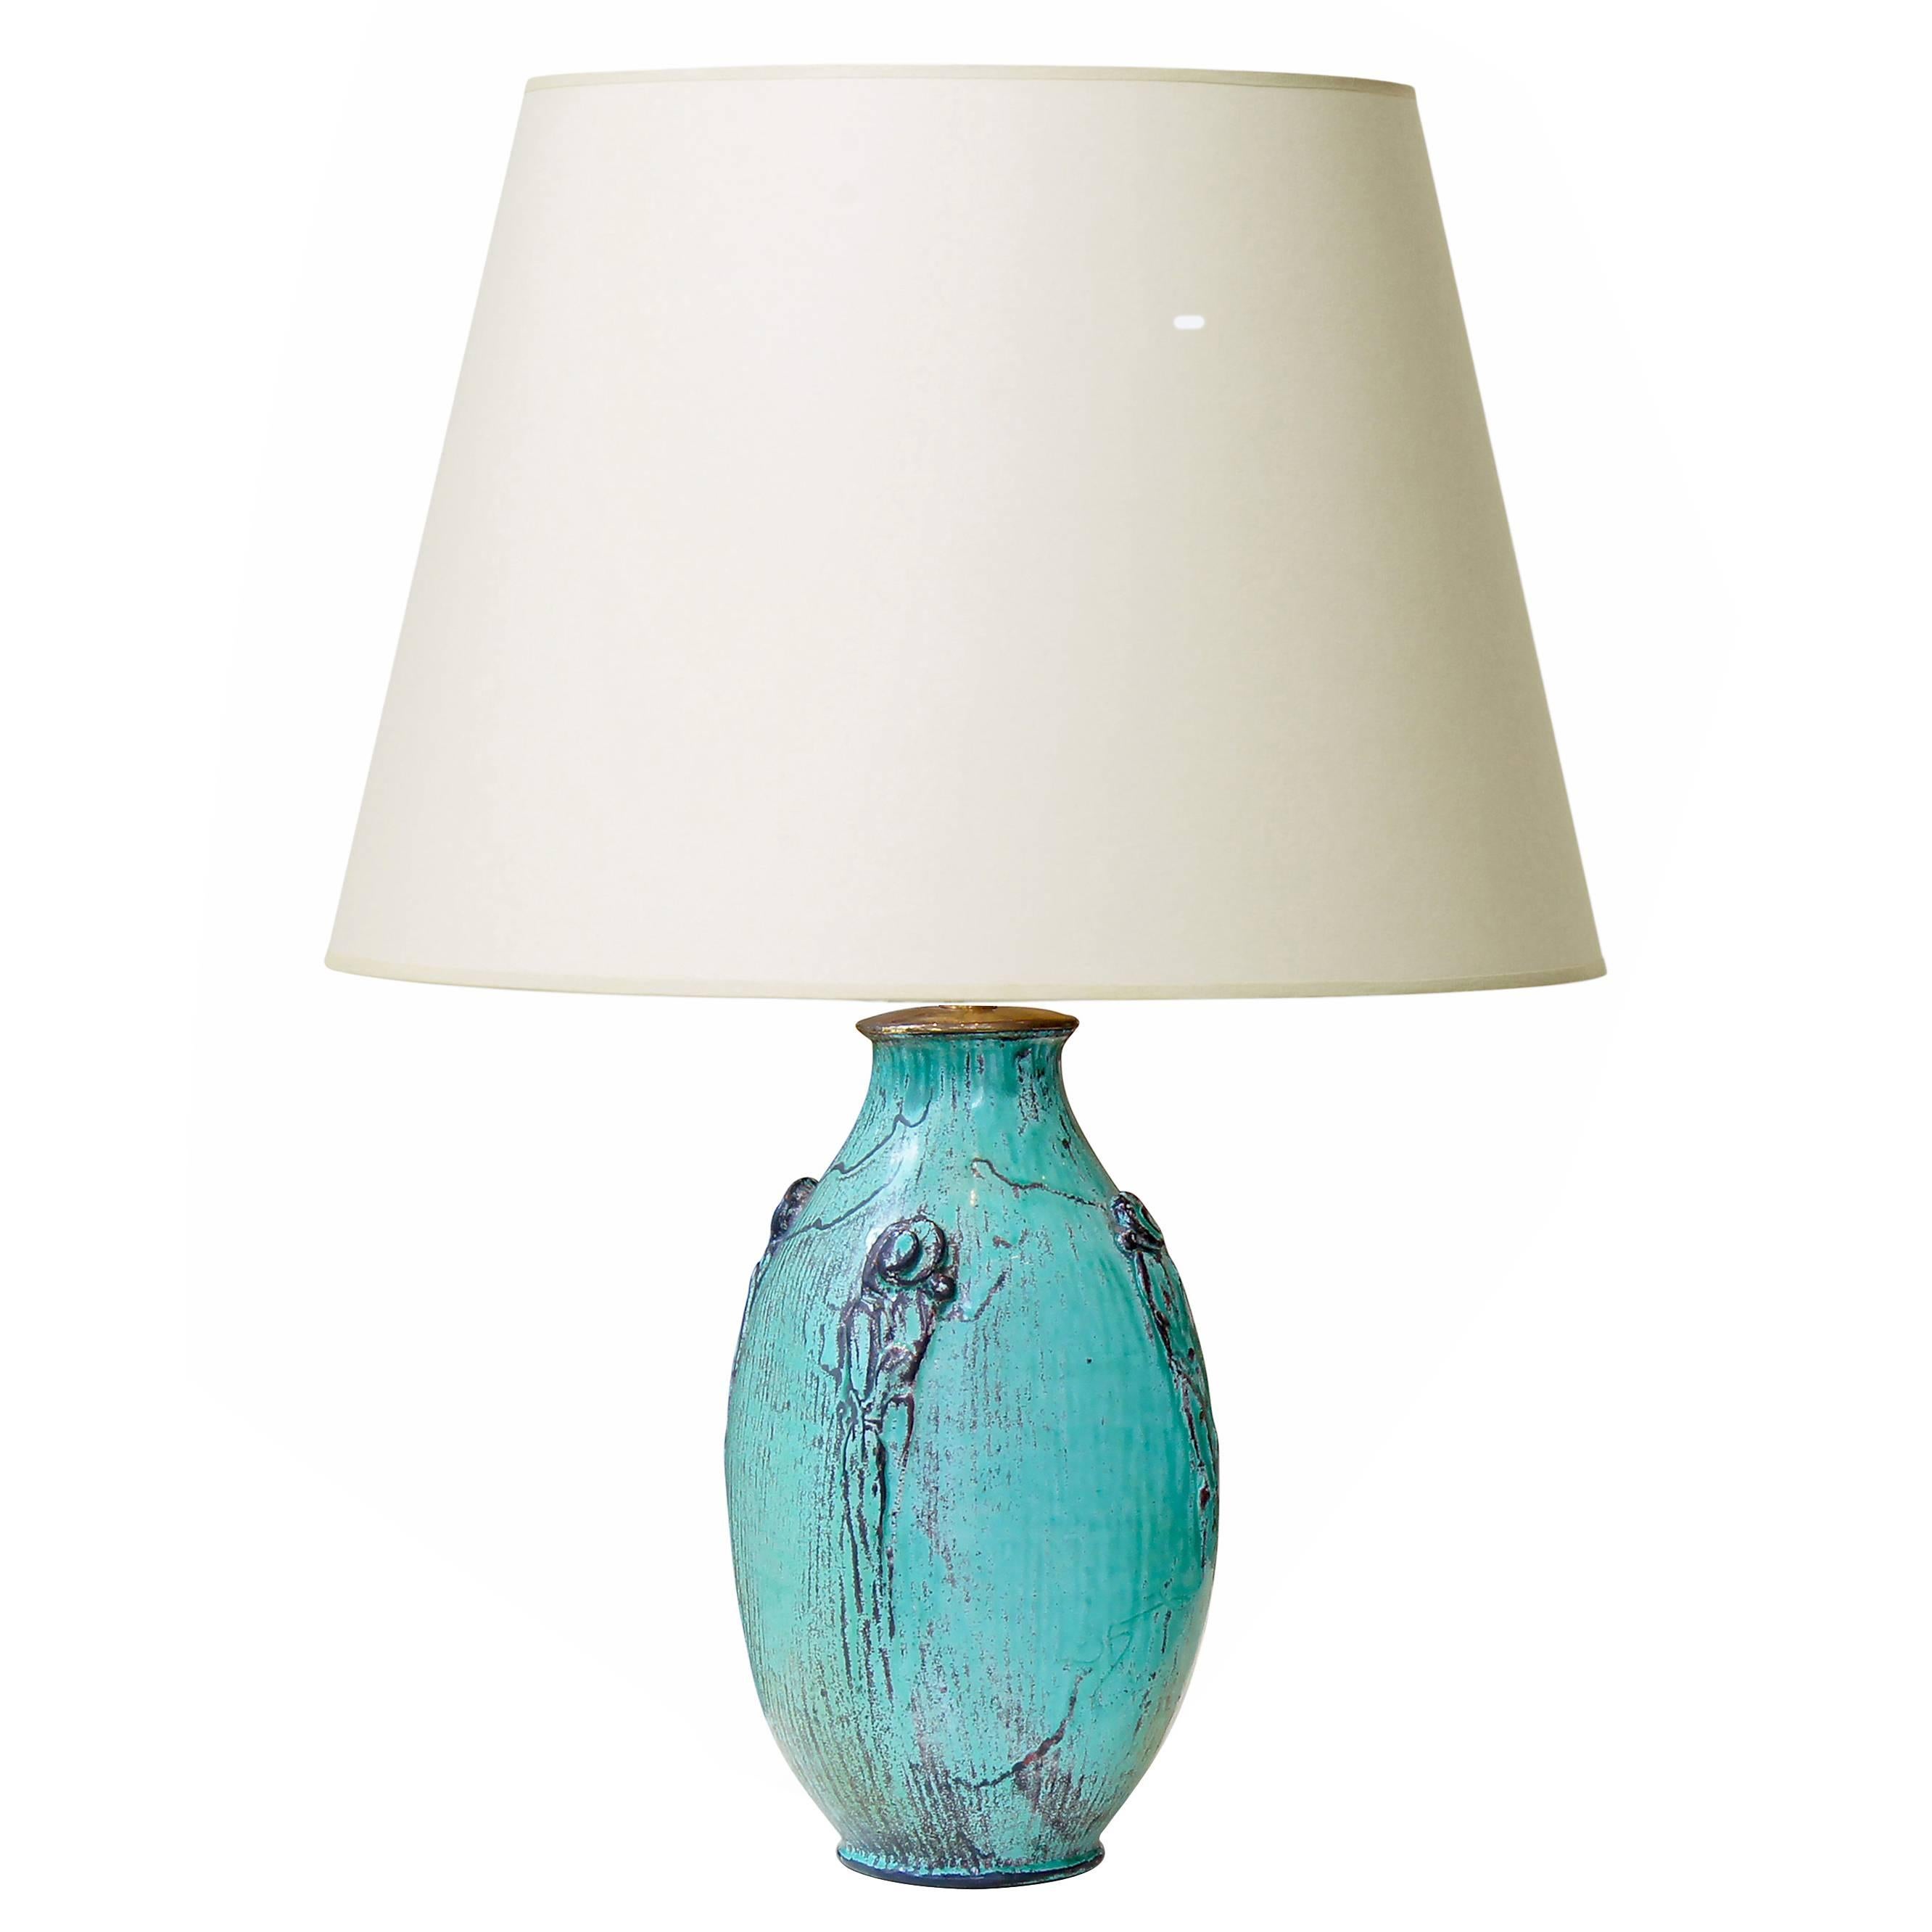 Elegant Table Lamp with Carved Frond Motifs and Teal-Gray Glaze For Sale